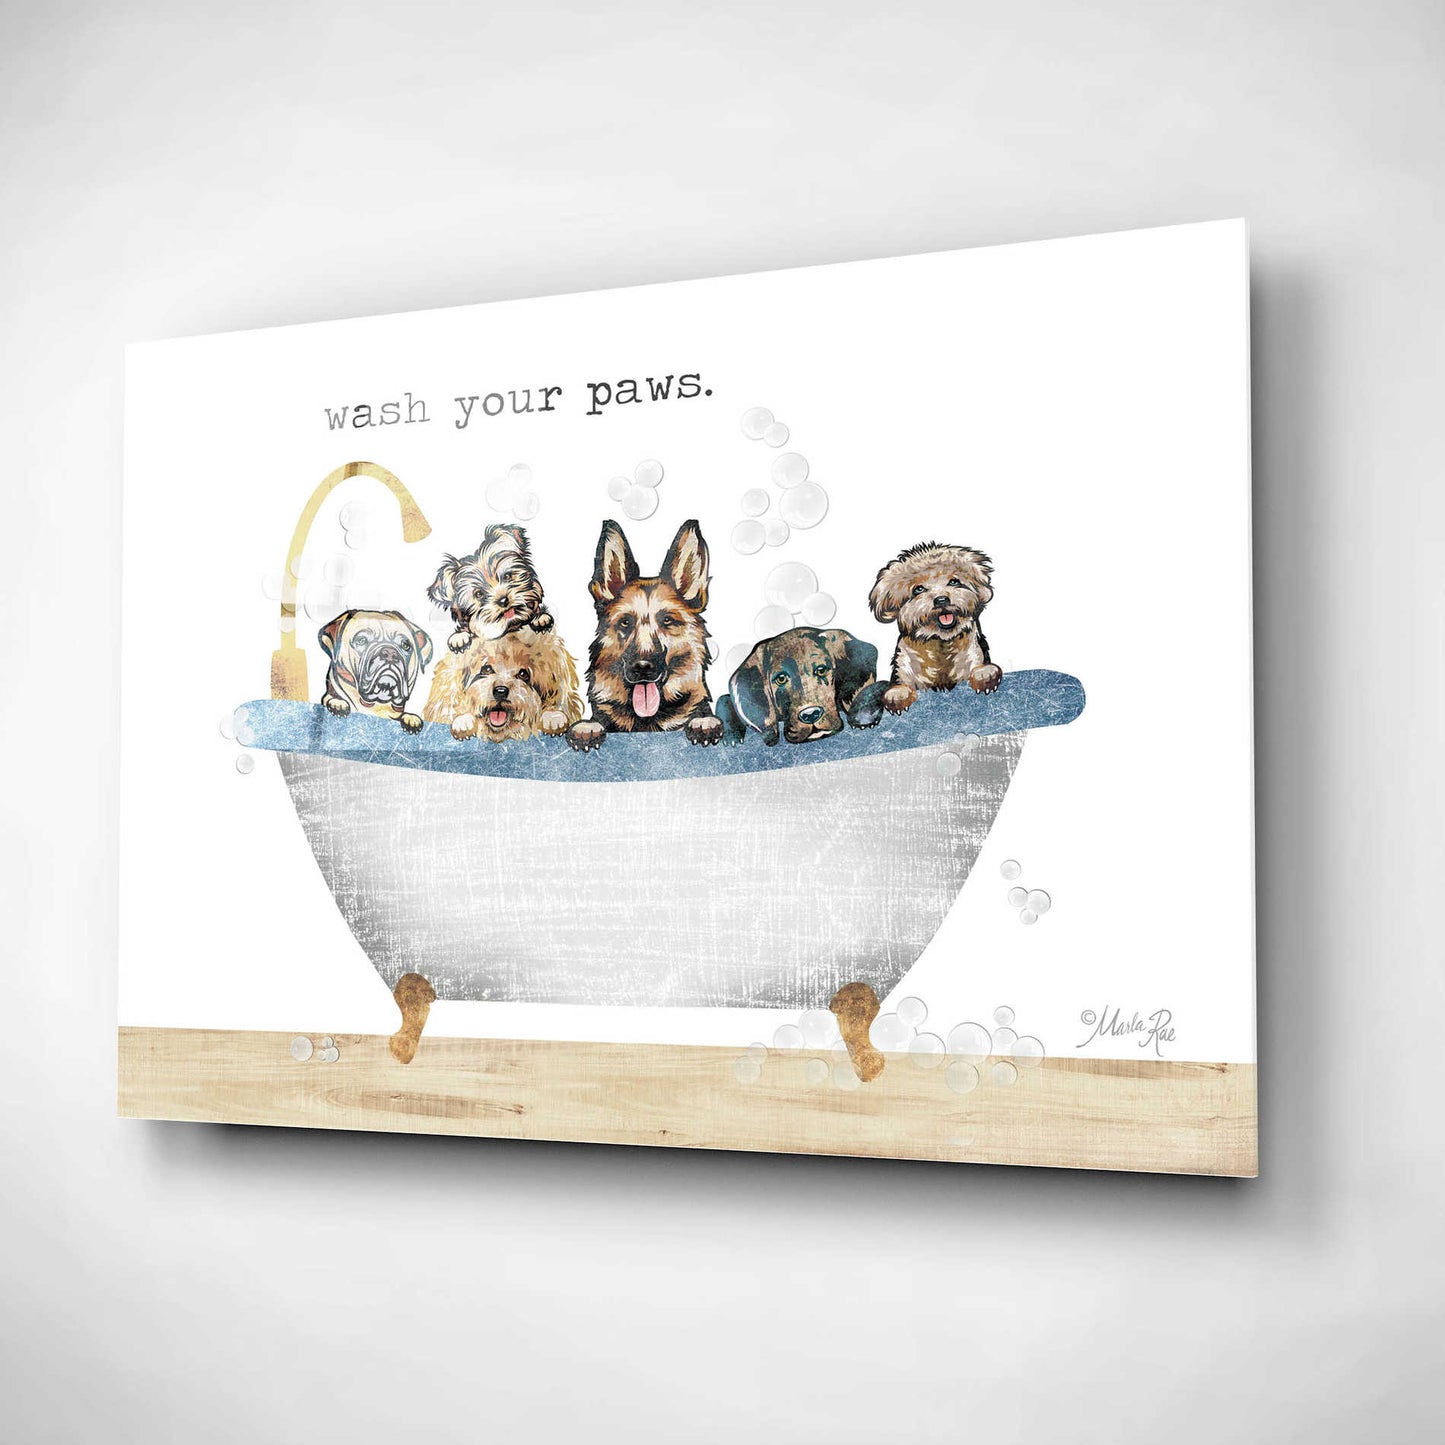 Epic Art 'Wash Your Paws' by Marla Rae, Acrylic Glass Wall Art,24x16